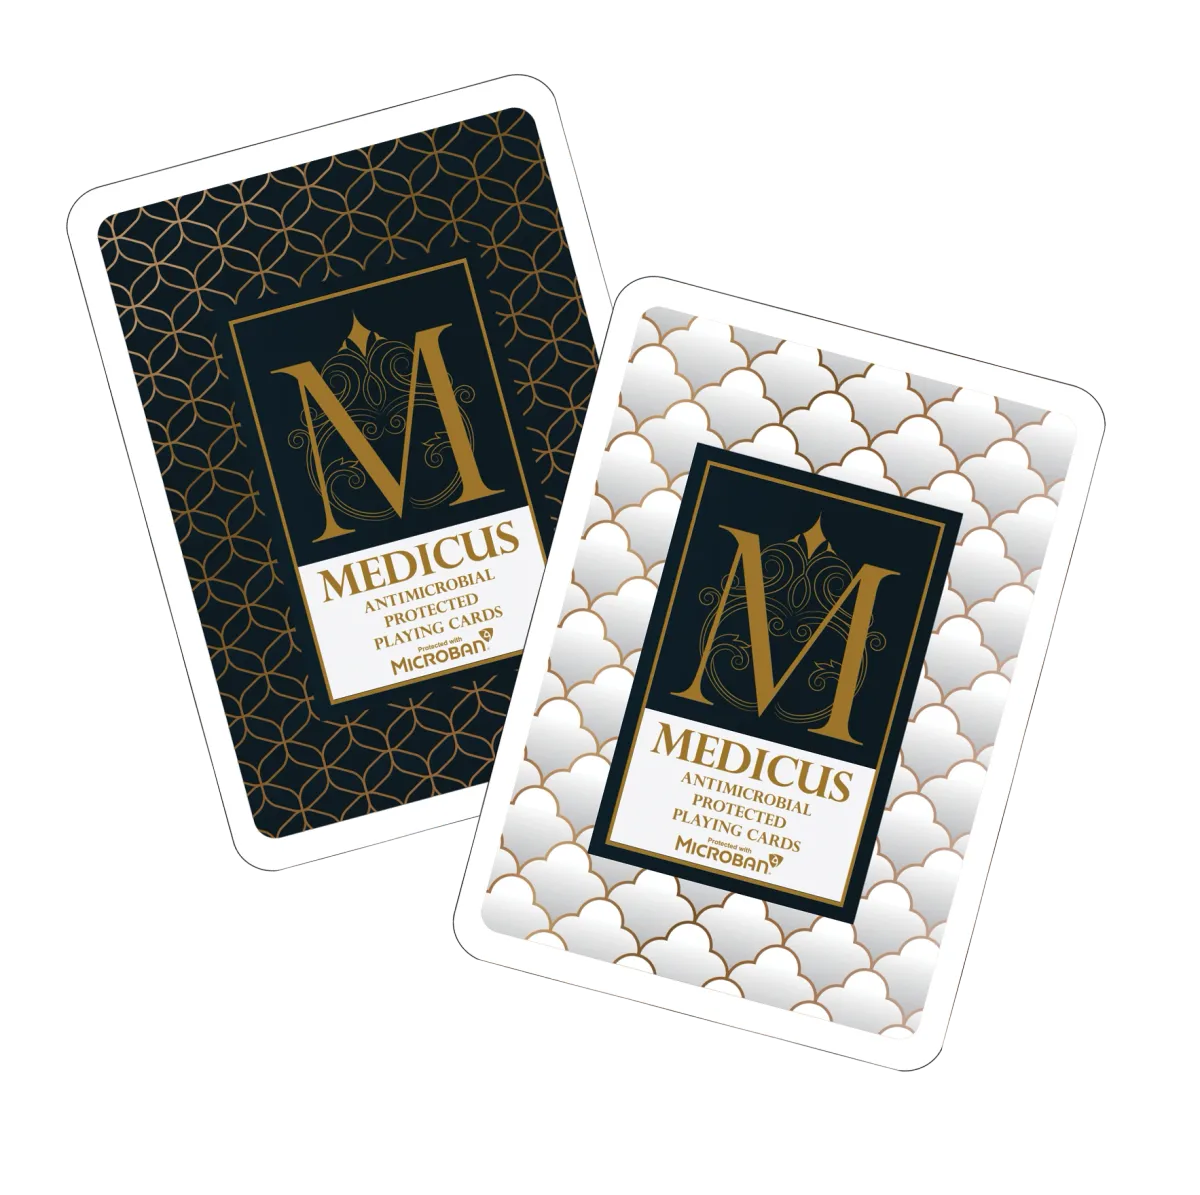 Casino Grade Playing Cards Poker- Box Set Medicus with Antimicrobial Microban® Protected